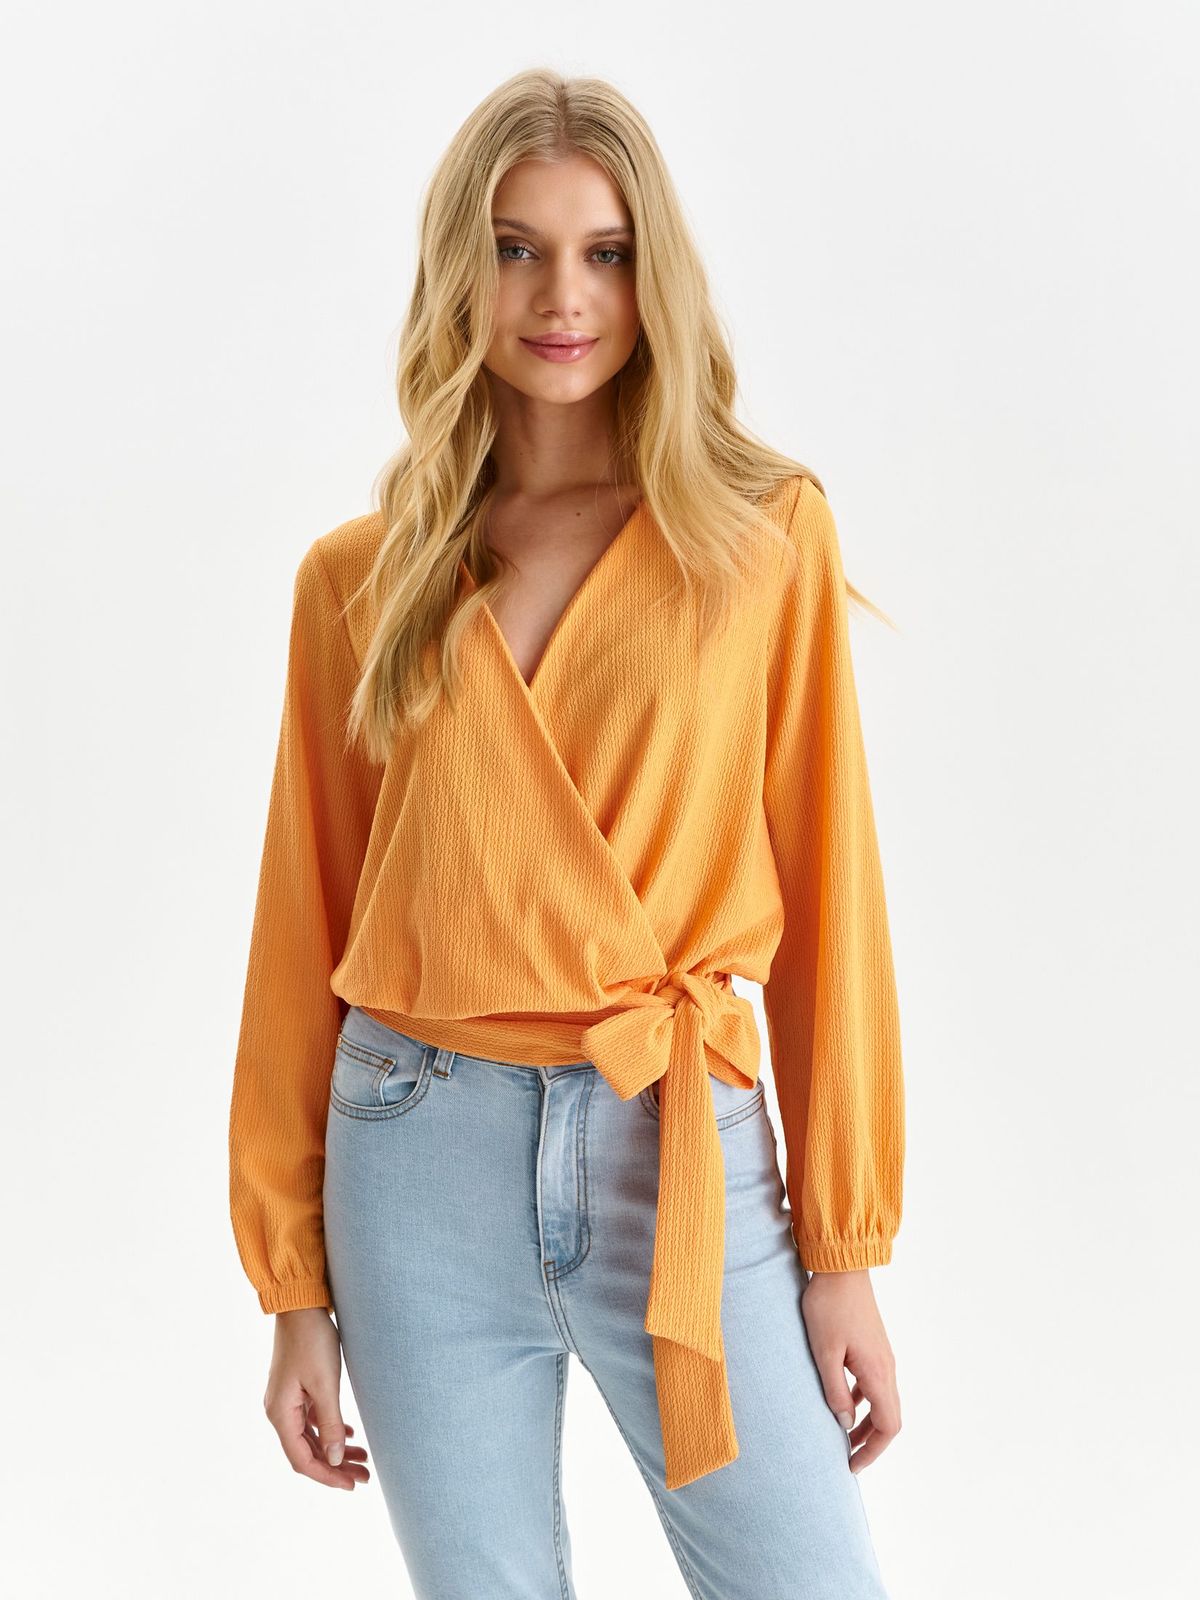 Orange women`s blouse loose fit from striped fabric wrap around